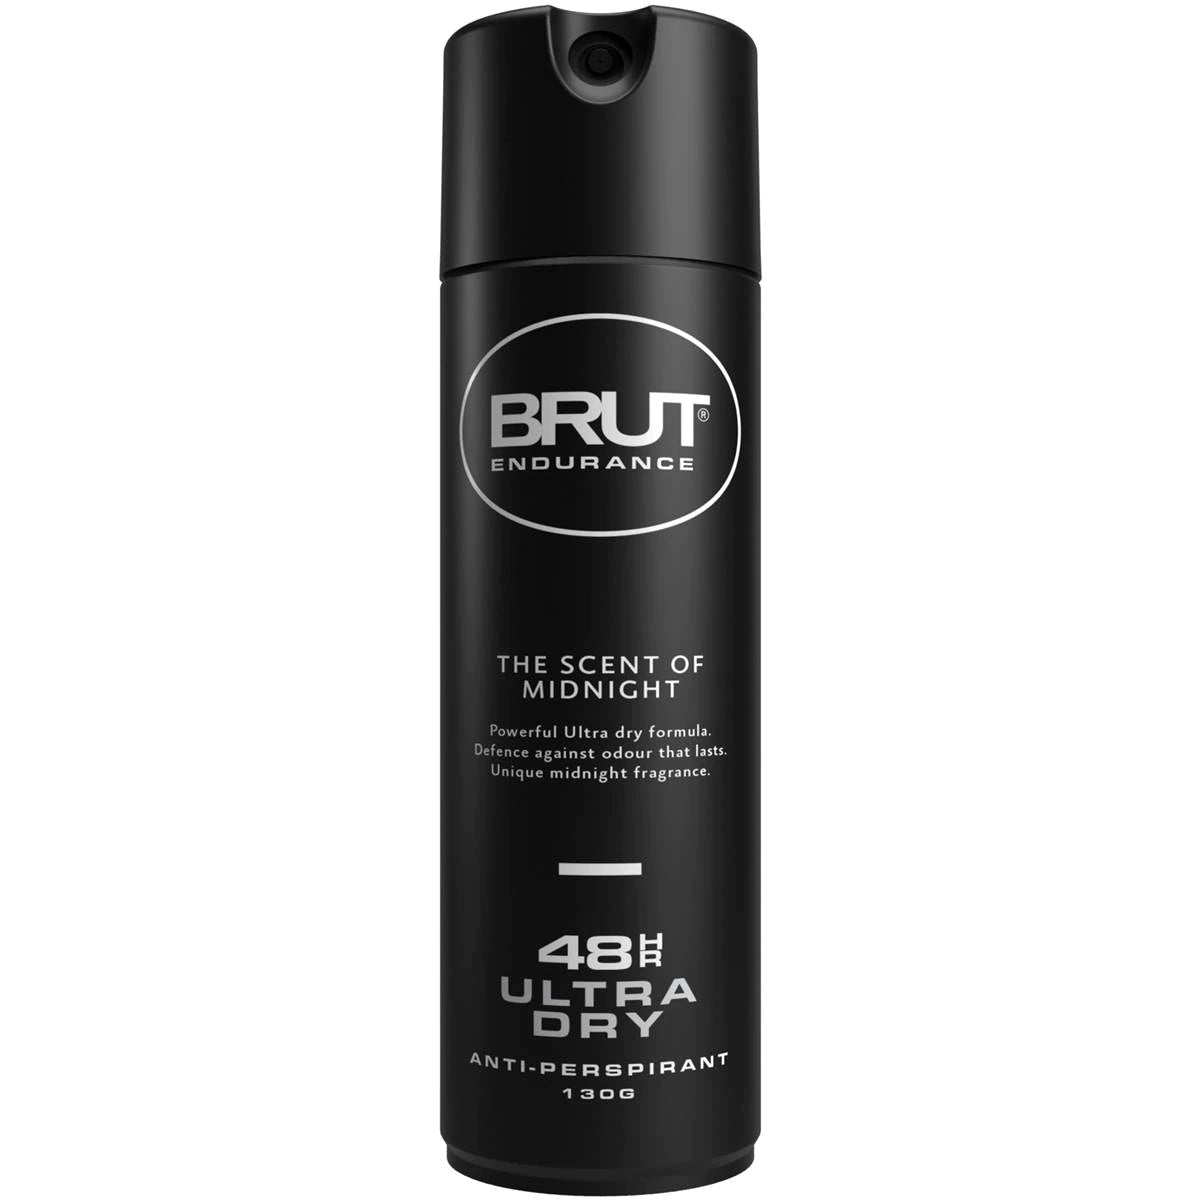 Brut Endurance The Scent of Midnight  48h Ultra Dry 130g